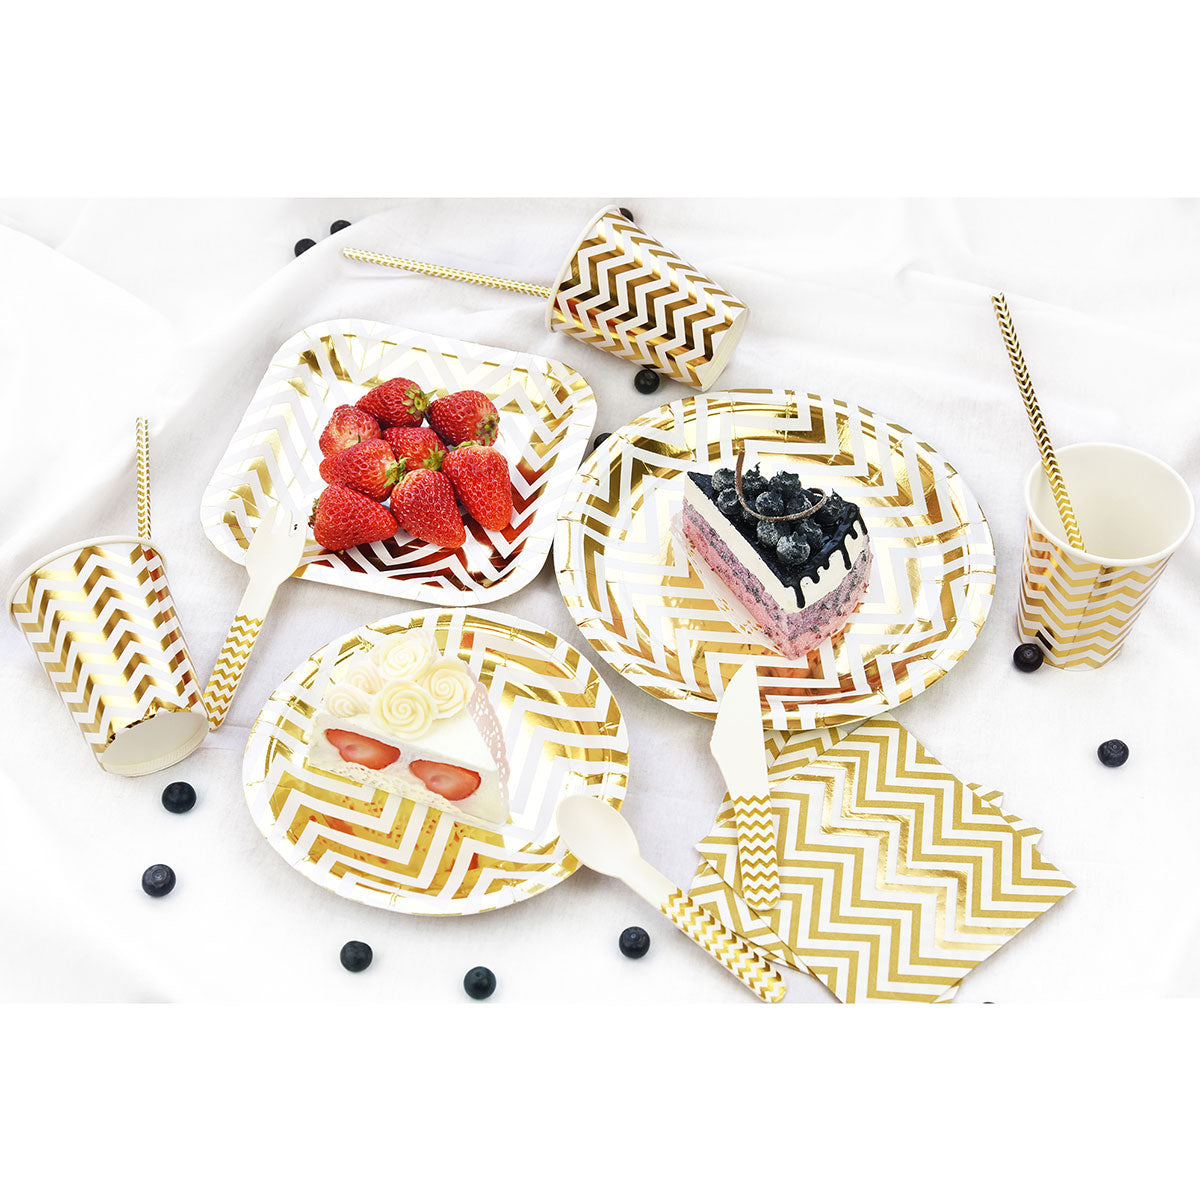 White and Gold Square Party Paper Plates 16 Pieces